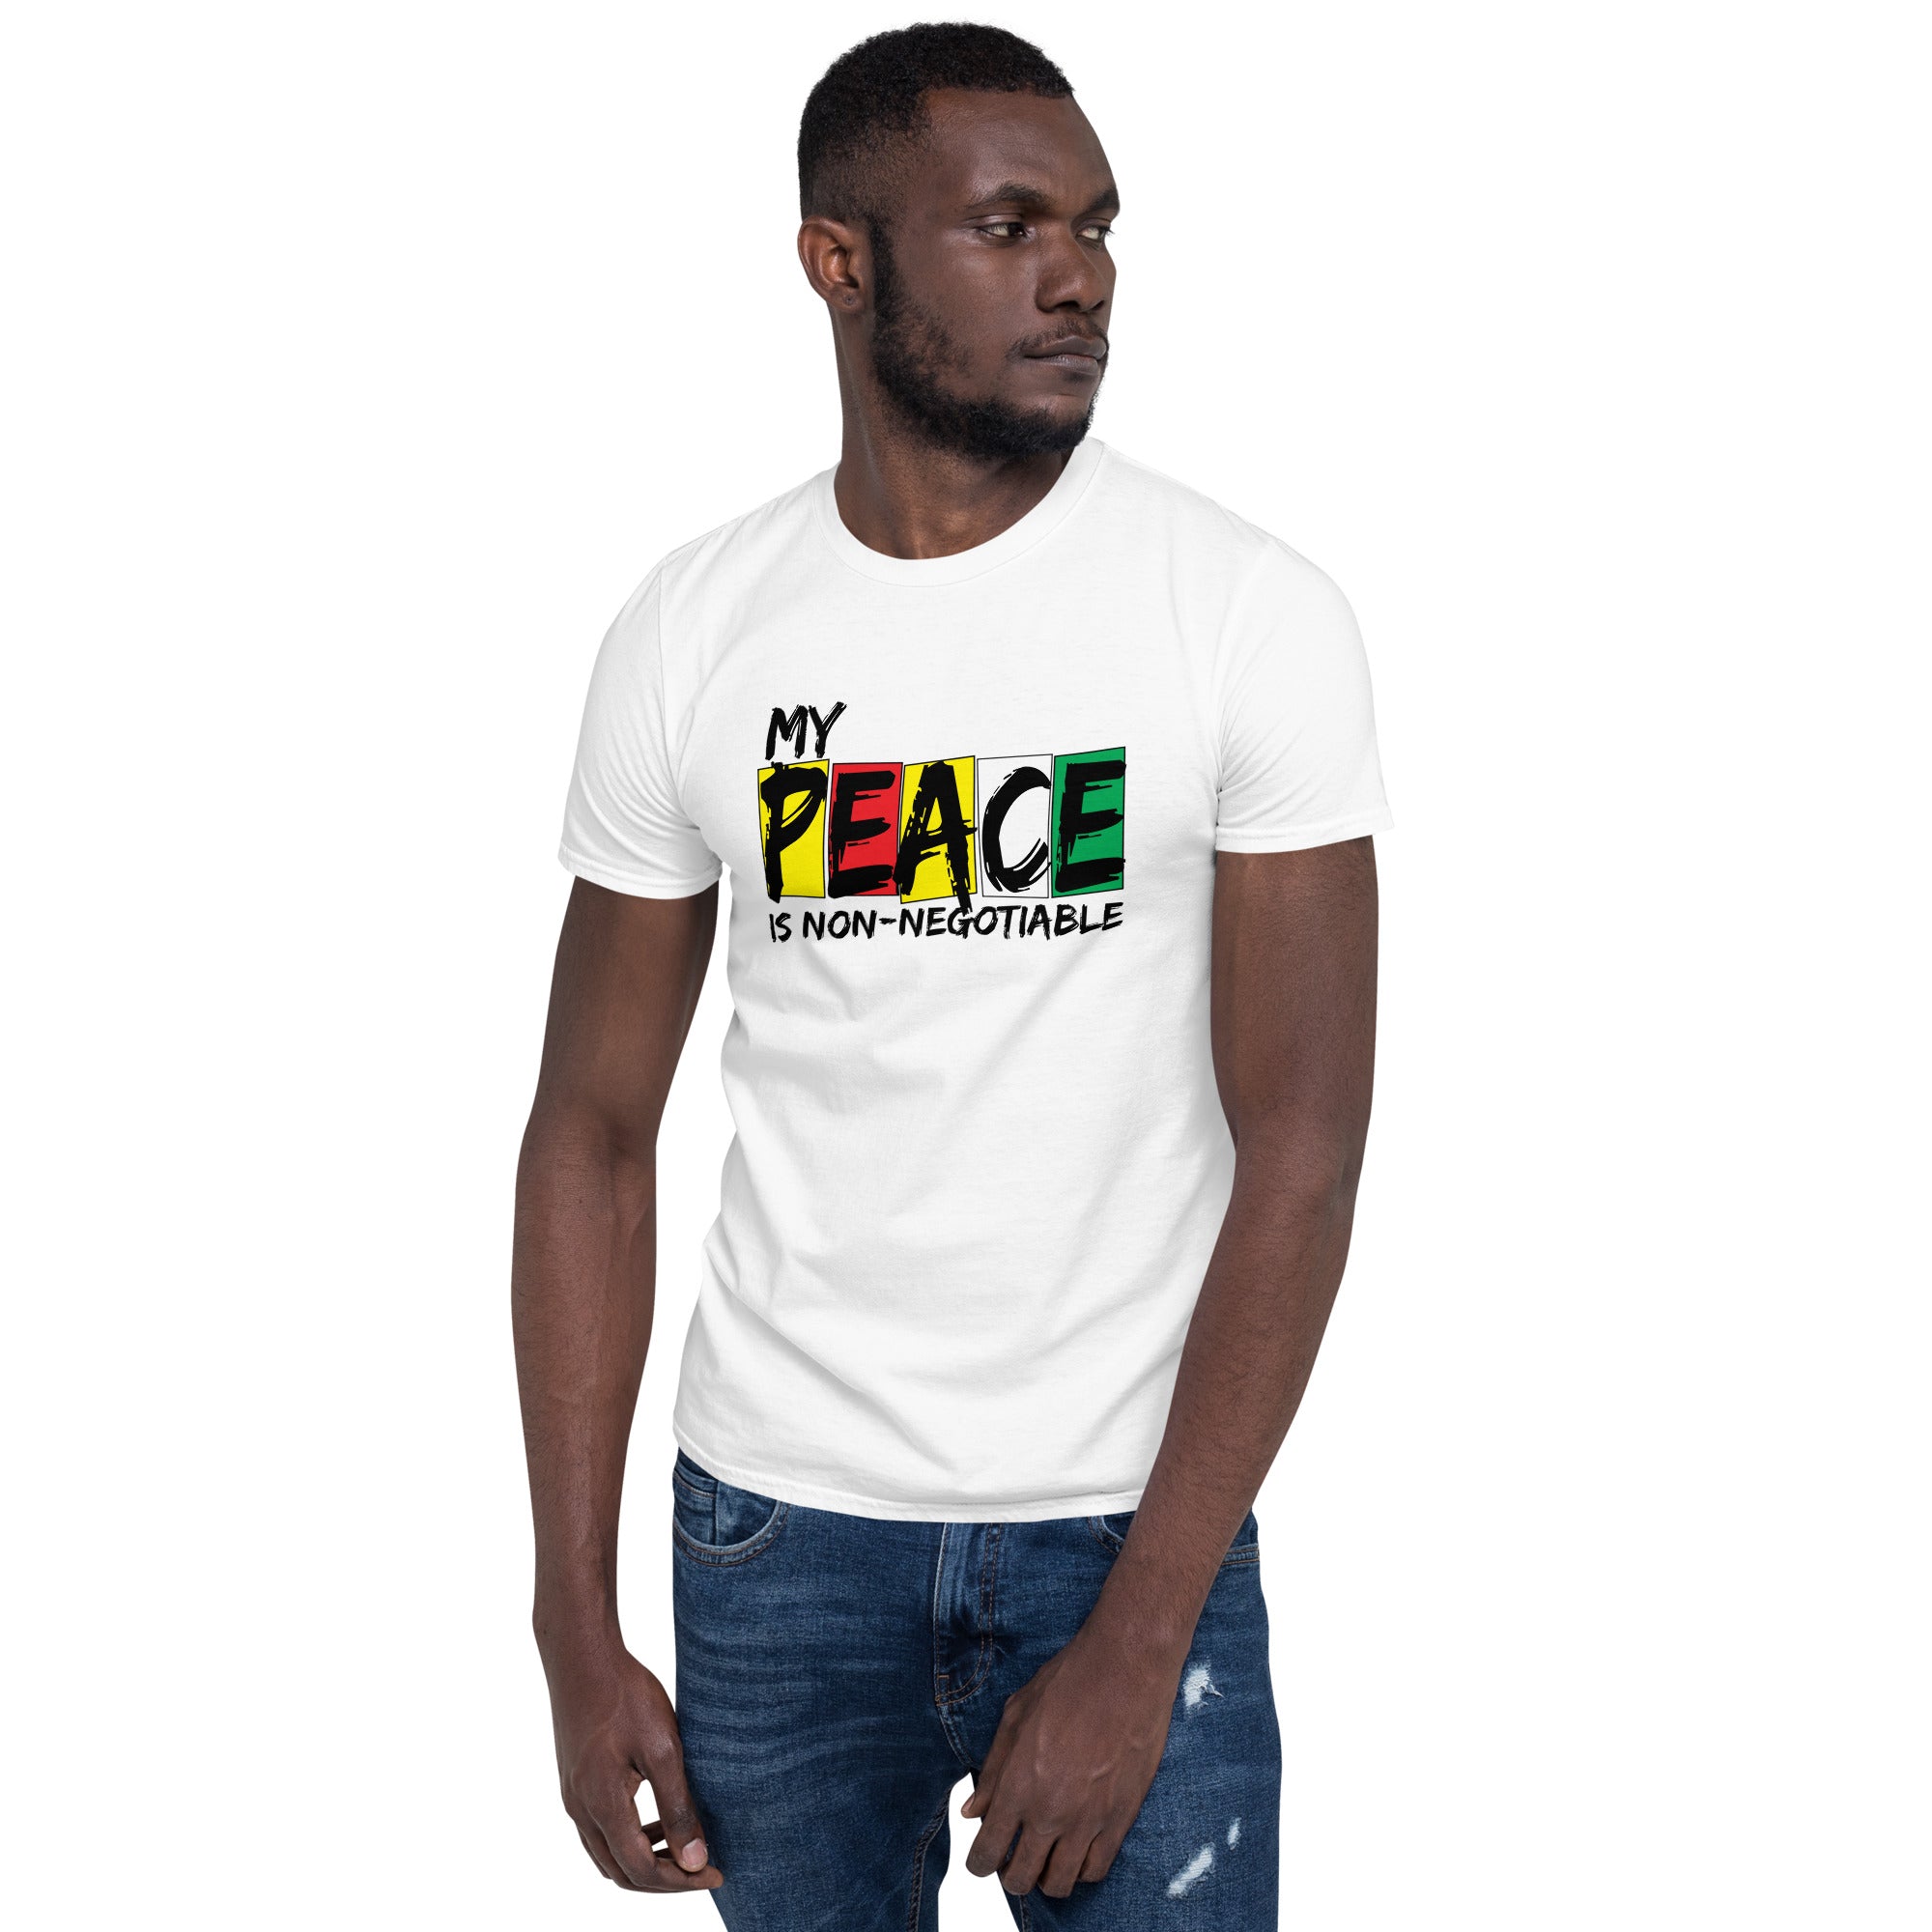 My Peace is Non Negotiable Short-Sleeve Unisex T-Shirt